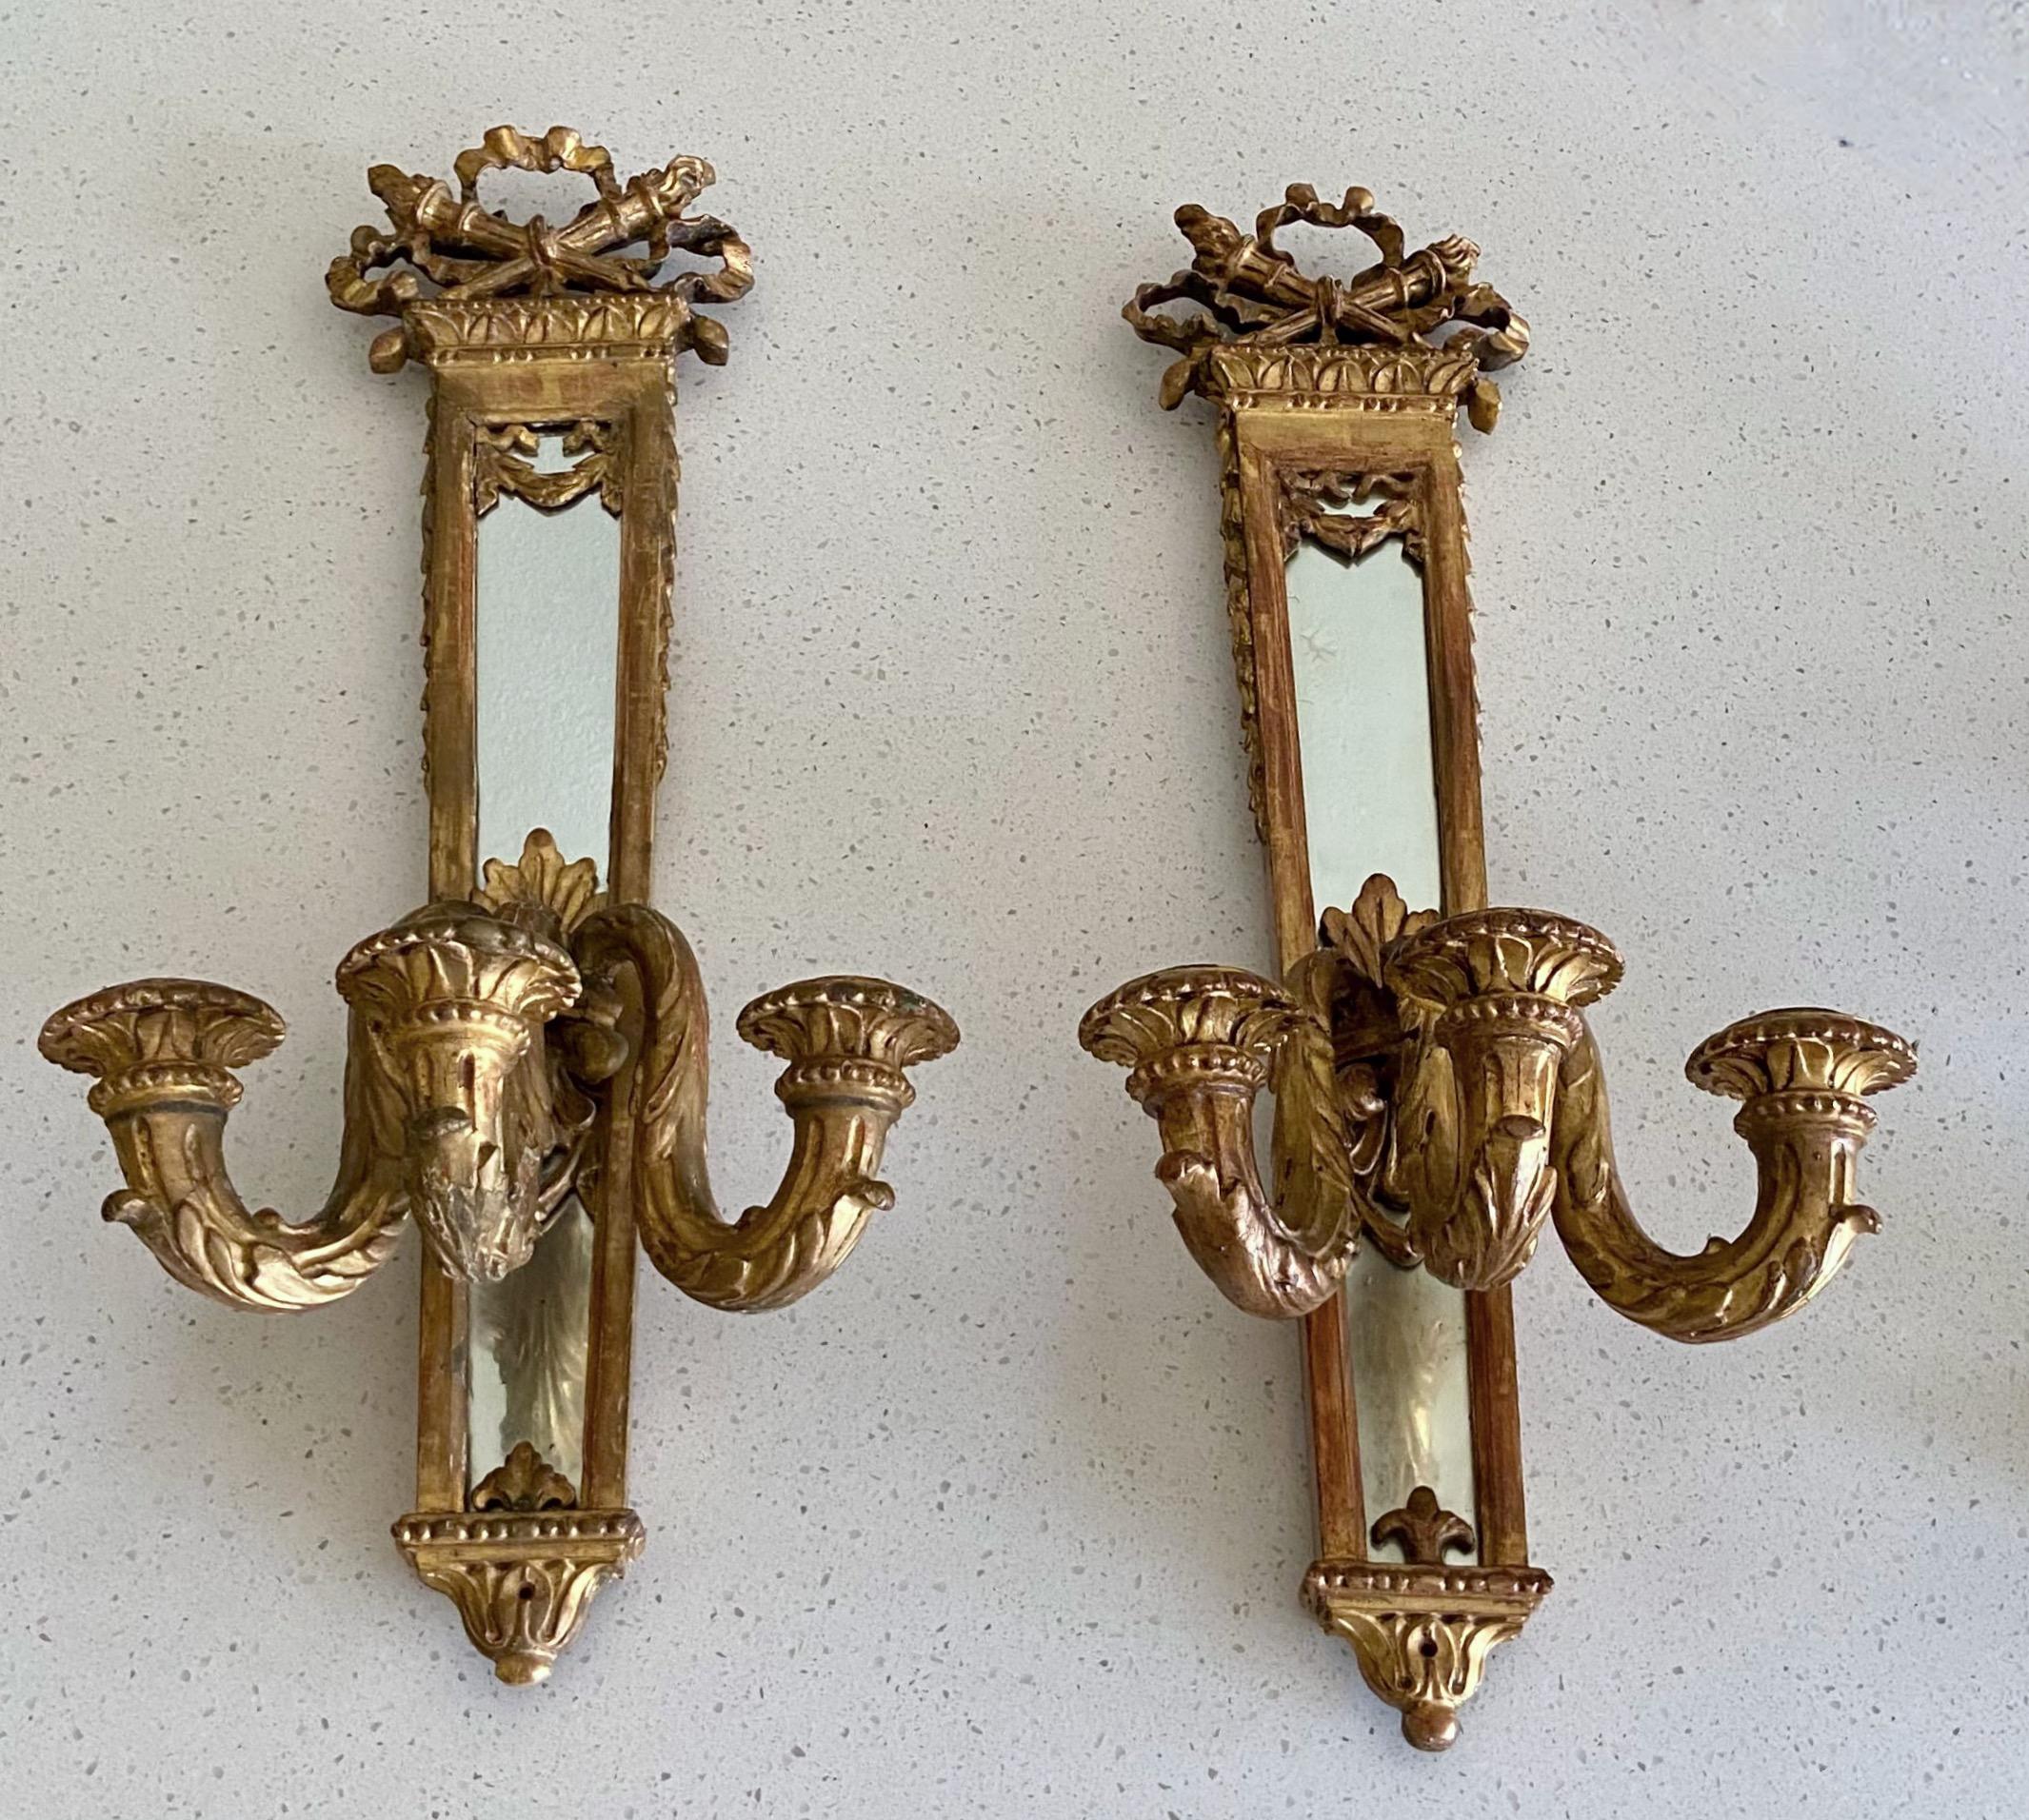 Pair of 19th century giltwood Louis XVI style three candle mirrored wall sconces (not electrified).